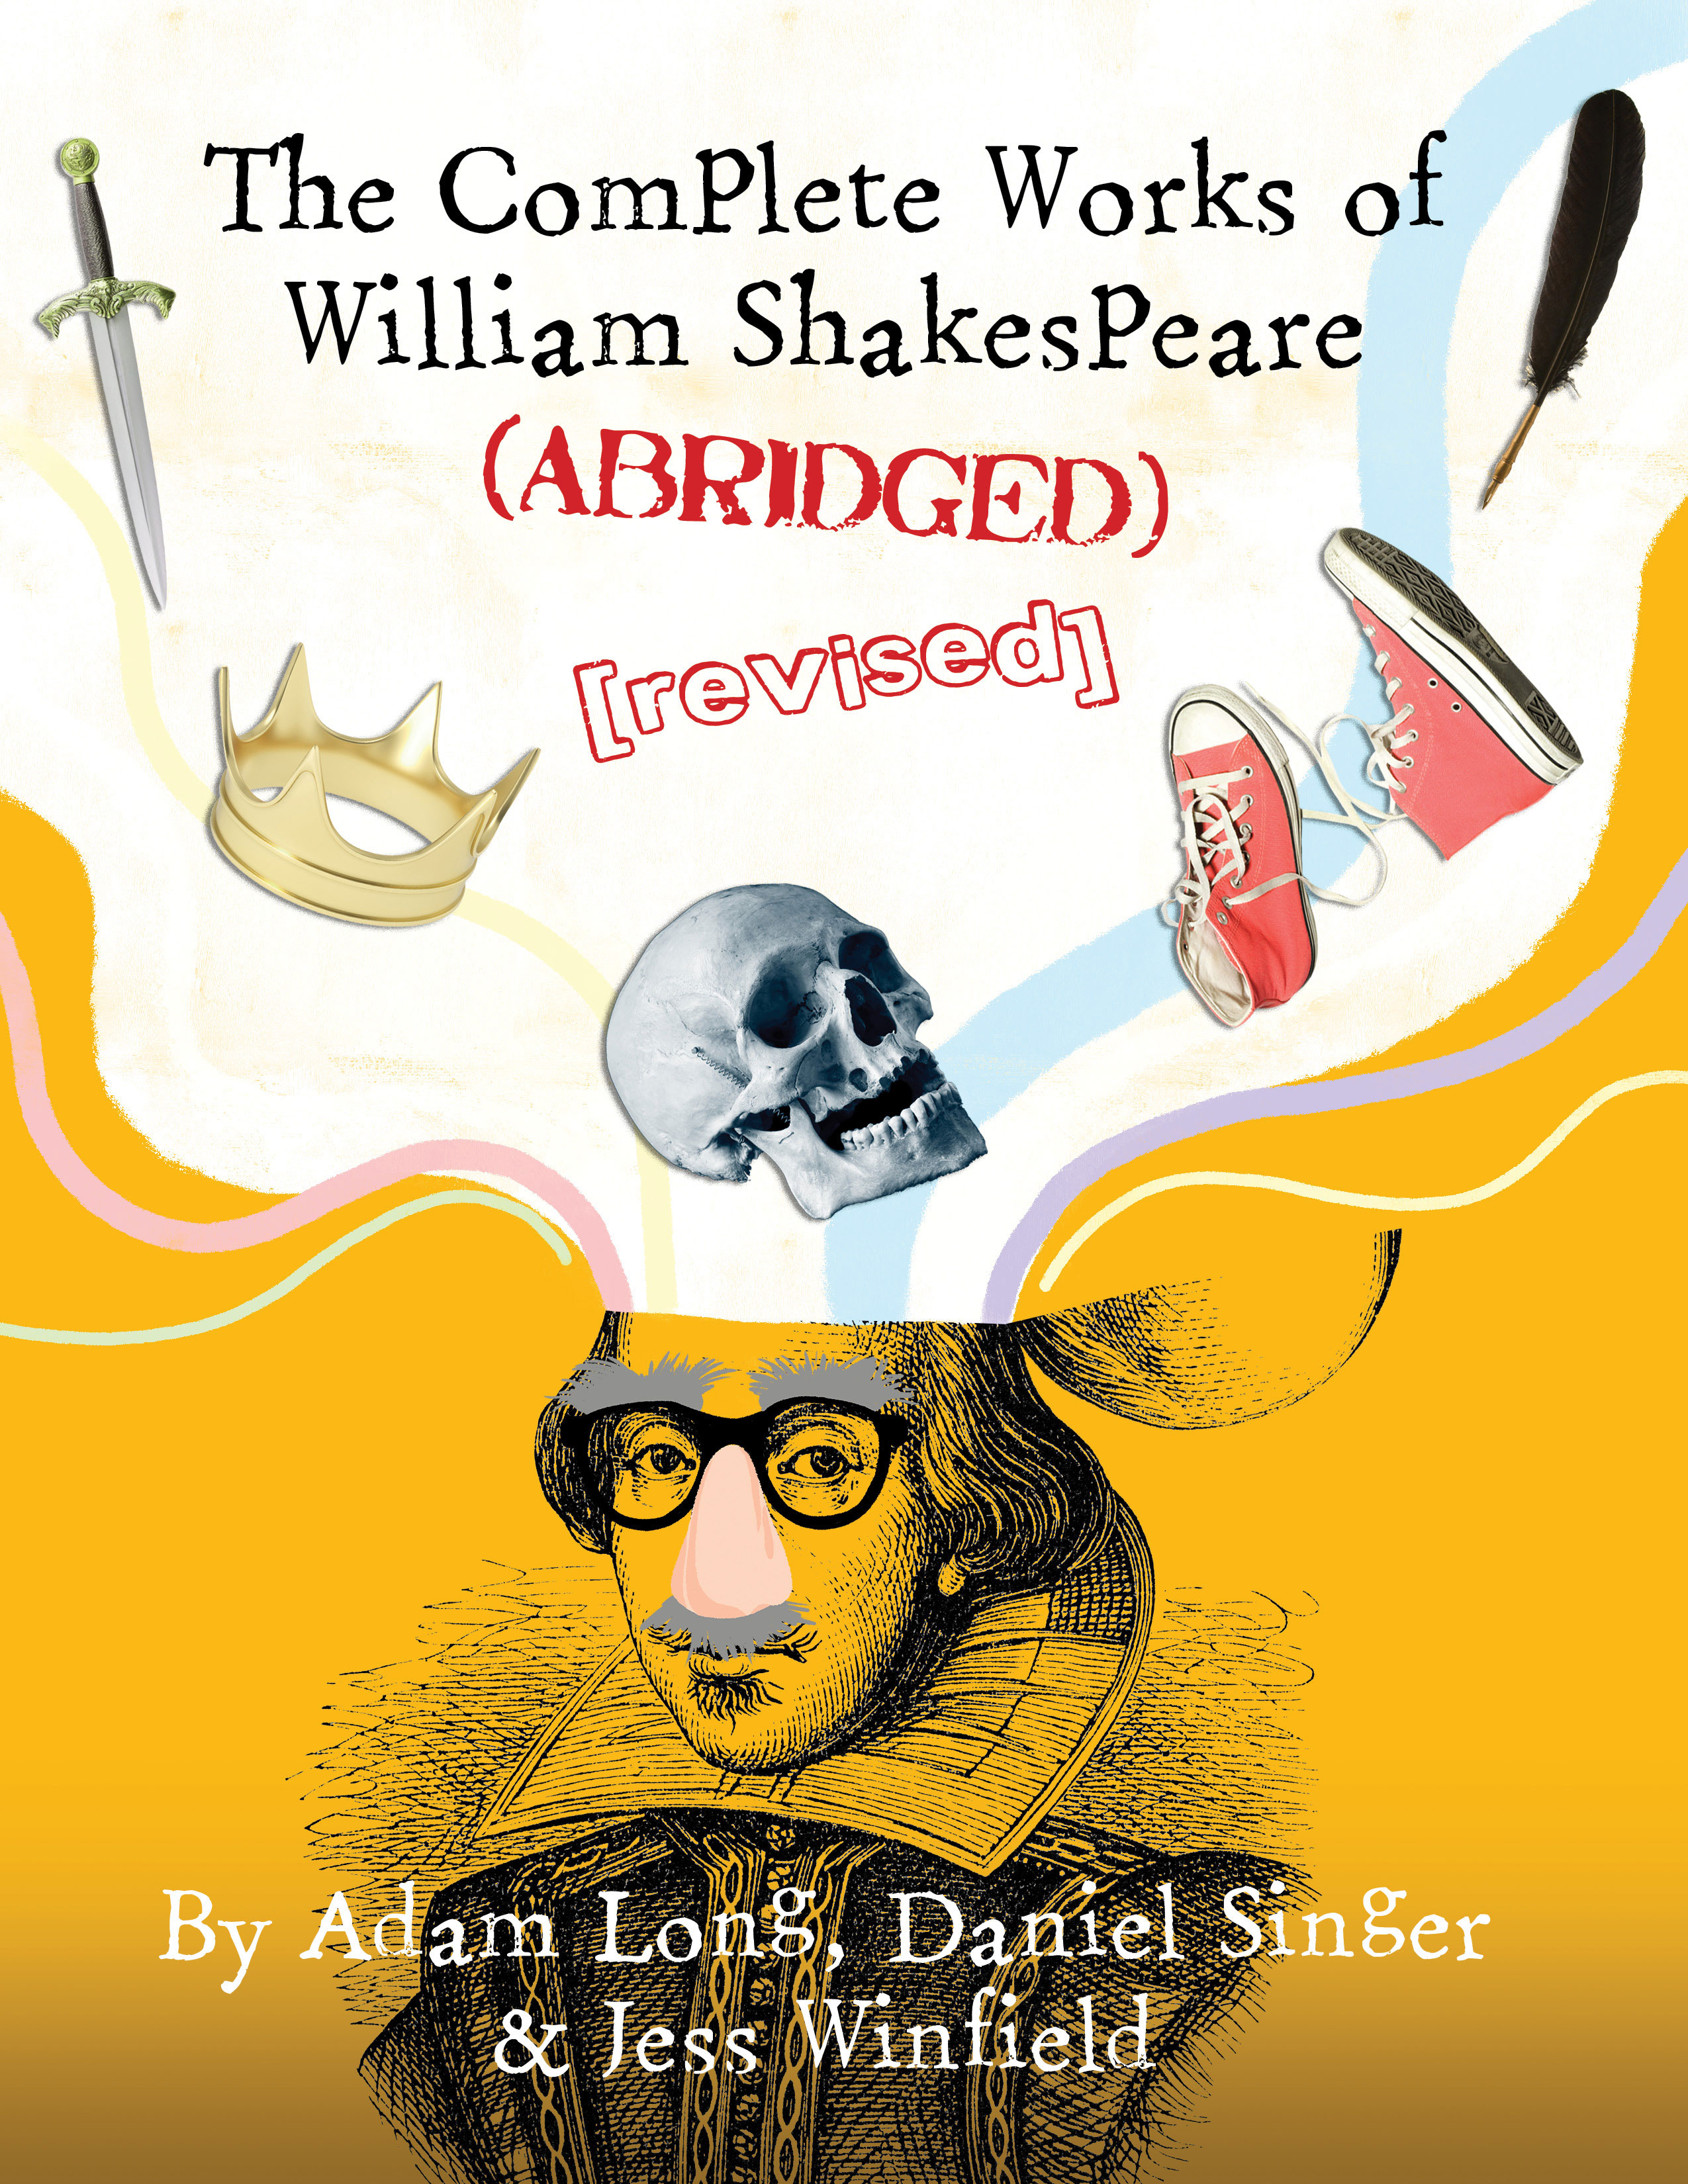 Poster for The Complete Works of William Shakespeare (abridged) (revised)